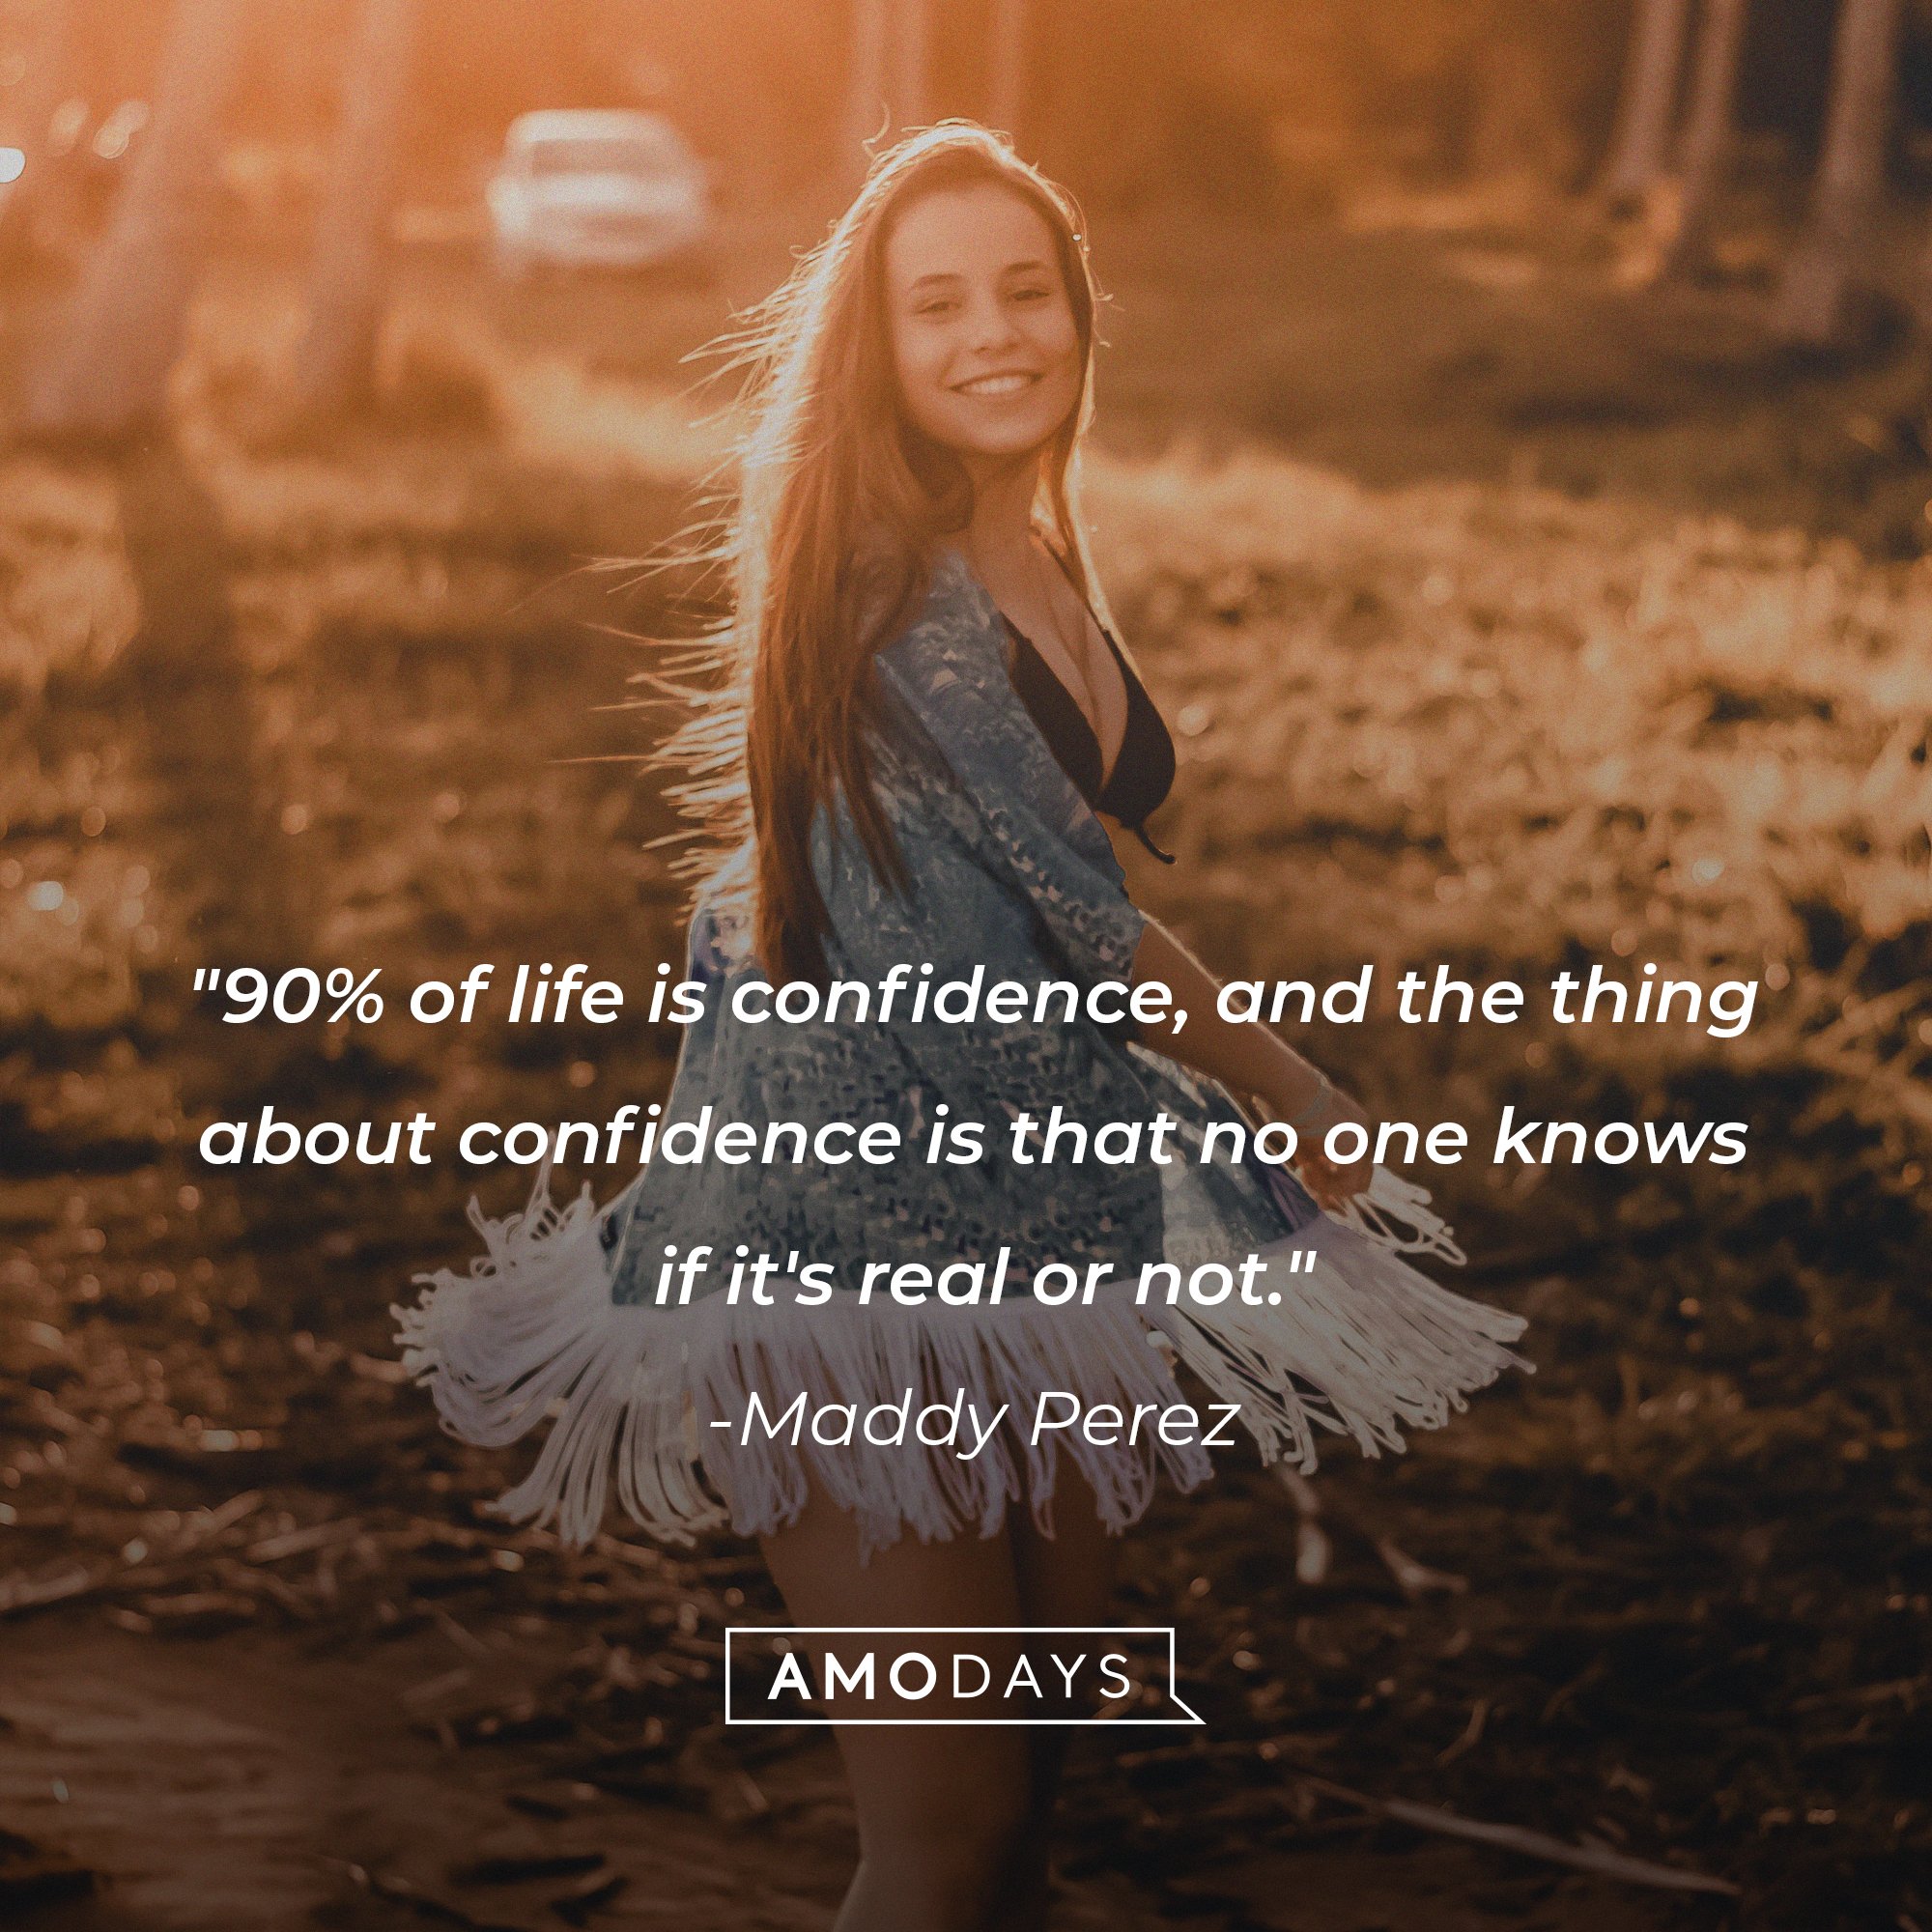 Maddy Perez' quote: "90% of life is confidence, and the thing about confidence is that no one knows if it's real or not." | Image: AmoDays 